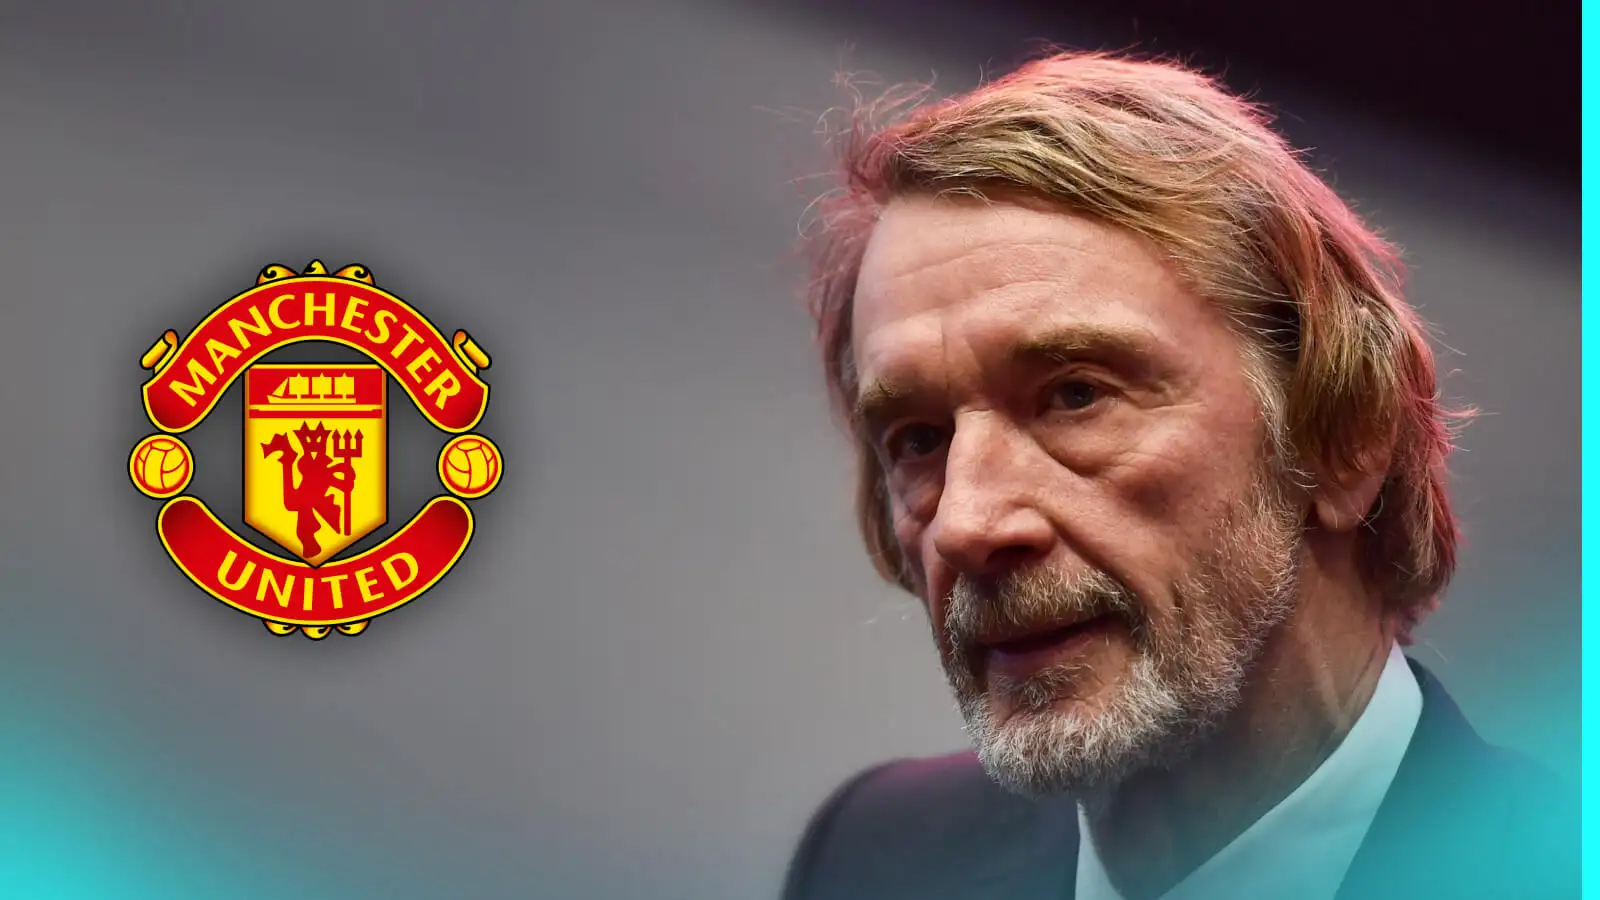 Male Utd co-owner Sir Jim Ratcliffe